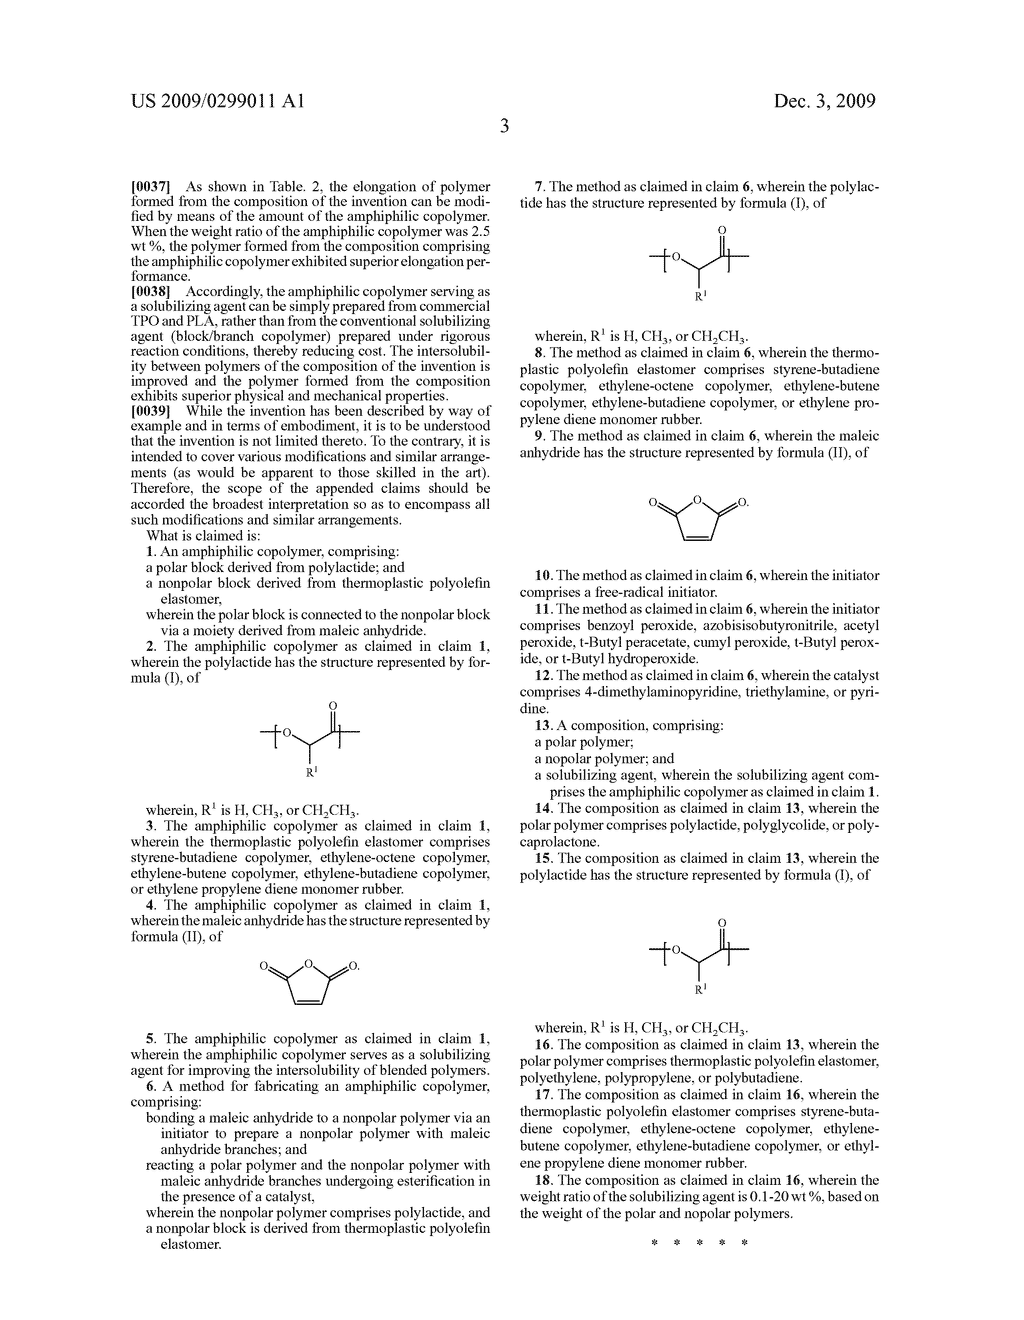 AMPHIPHILIC COPOLYMER AND METHOD FOR FABRICATING THE SAME - diagram, schematic, and image 07